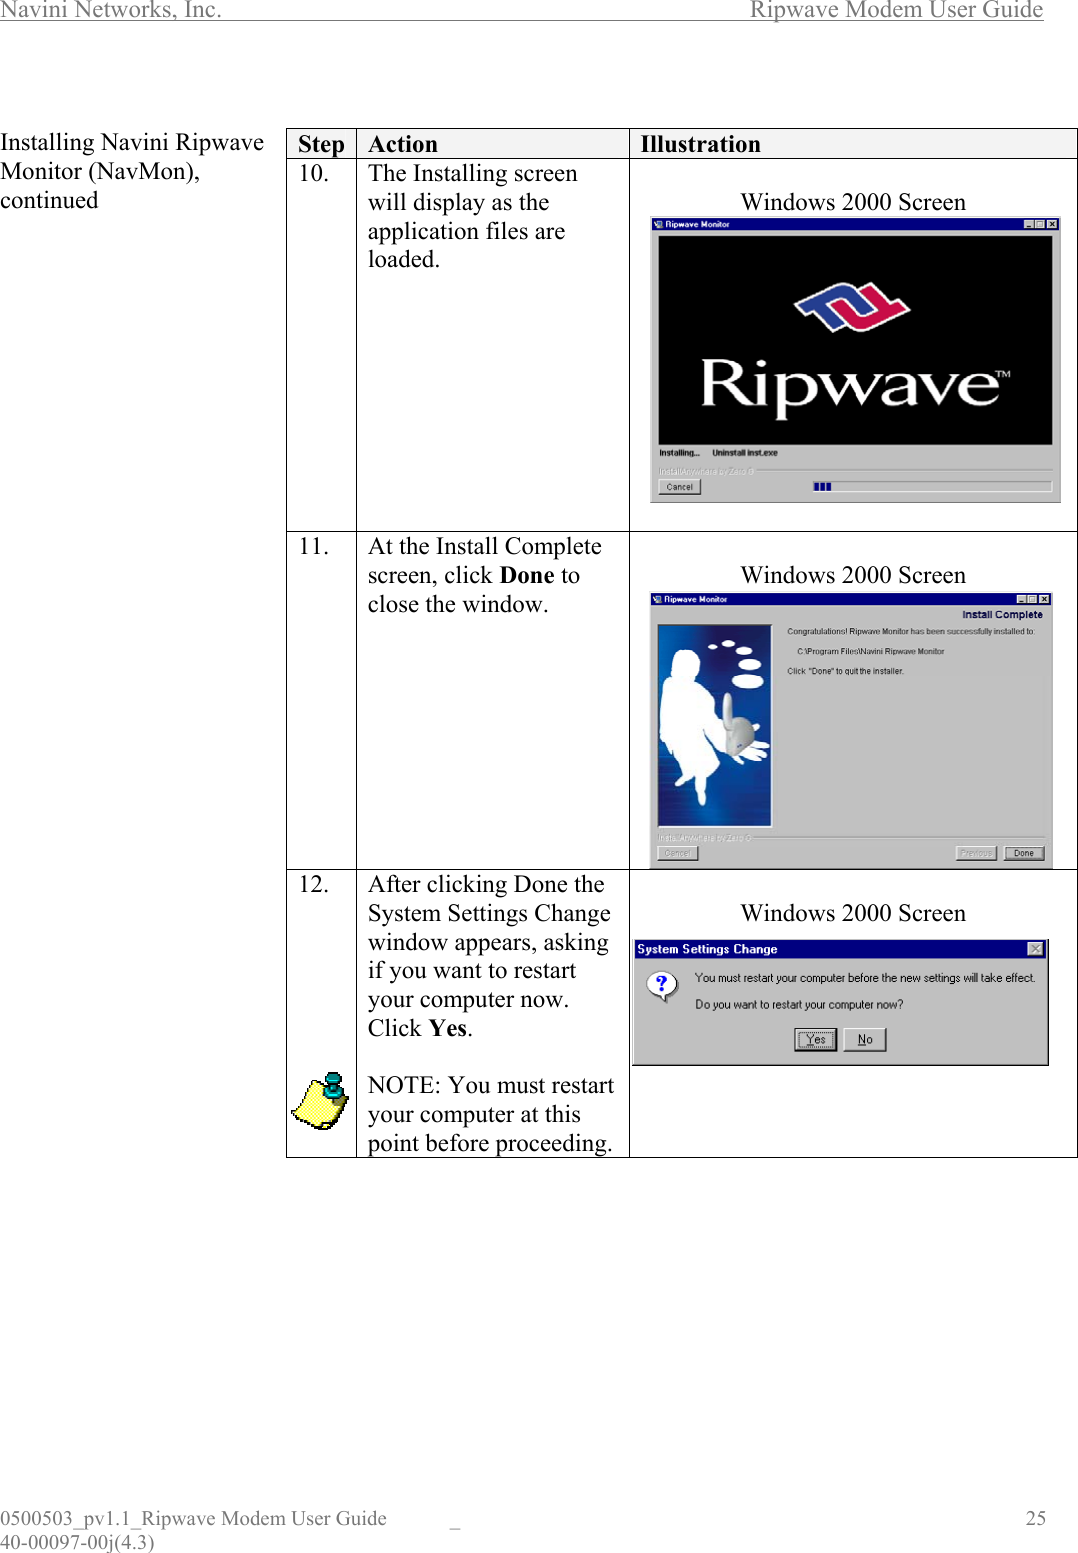 Navini Networks, Inc.        Ripwave Modem User Guide 0500503_pv1.1_Ripwave Modem User Guide  _                                    25 40-00097-00j(4.3)  Installing Navini Ripwave Monitor (NavMon), continued                                            Step  Action  Illustration 10. The Installing screen will display as the application files are loaded.  Windows 2000 Screen   11.  At the Install Complete screen, click Done to close the window.  Windows 2000 Screen  12.   After clicking Done the System Settings Change window appears, asking if you want to restart your computer now. Click Yes.  NOTE: You must restart your computer at this point before proceeding.  Windows 2000 Screen         